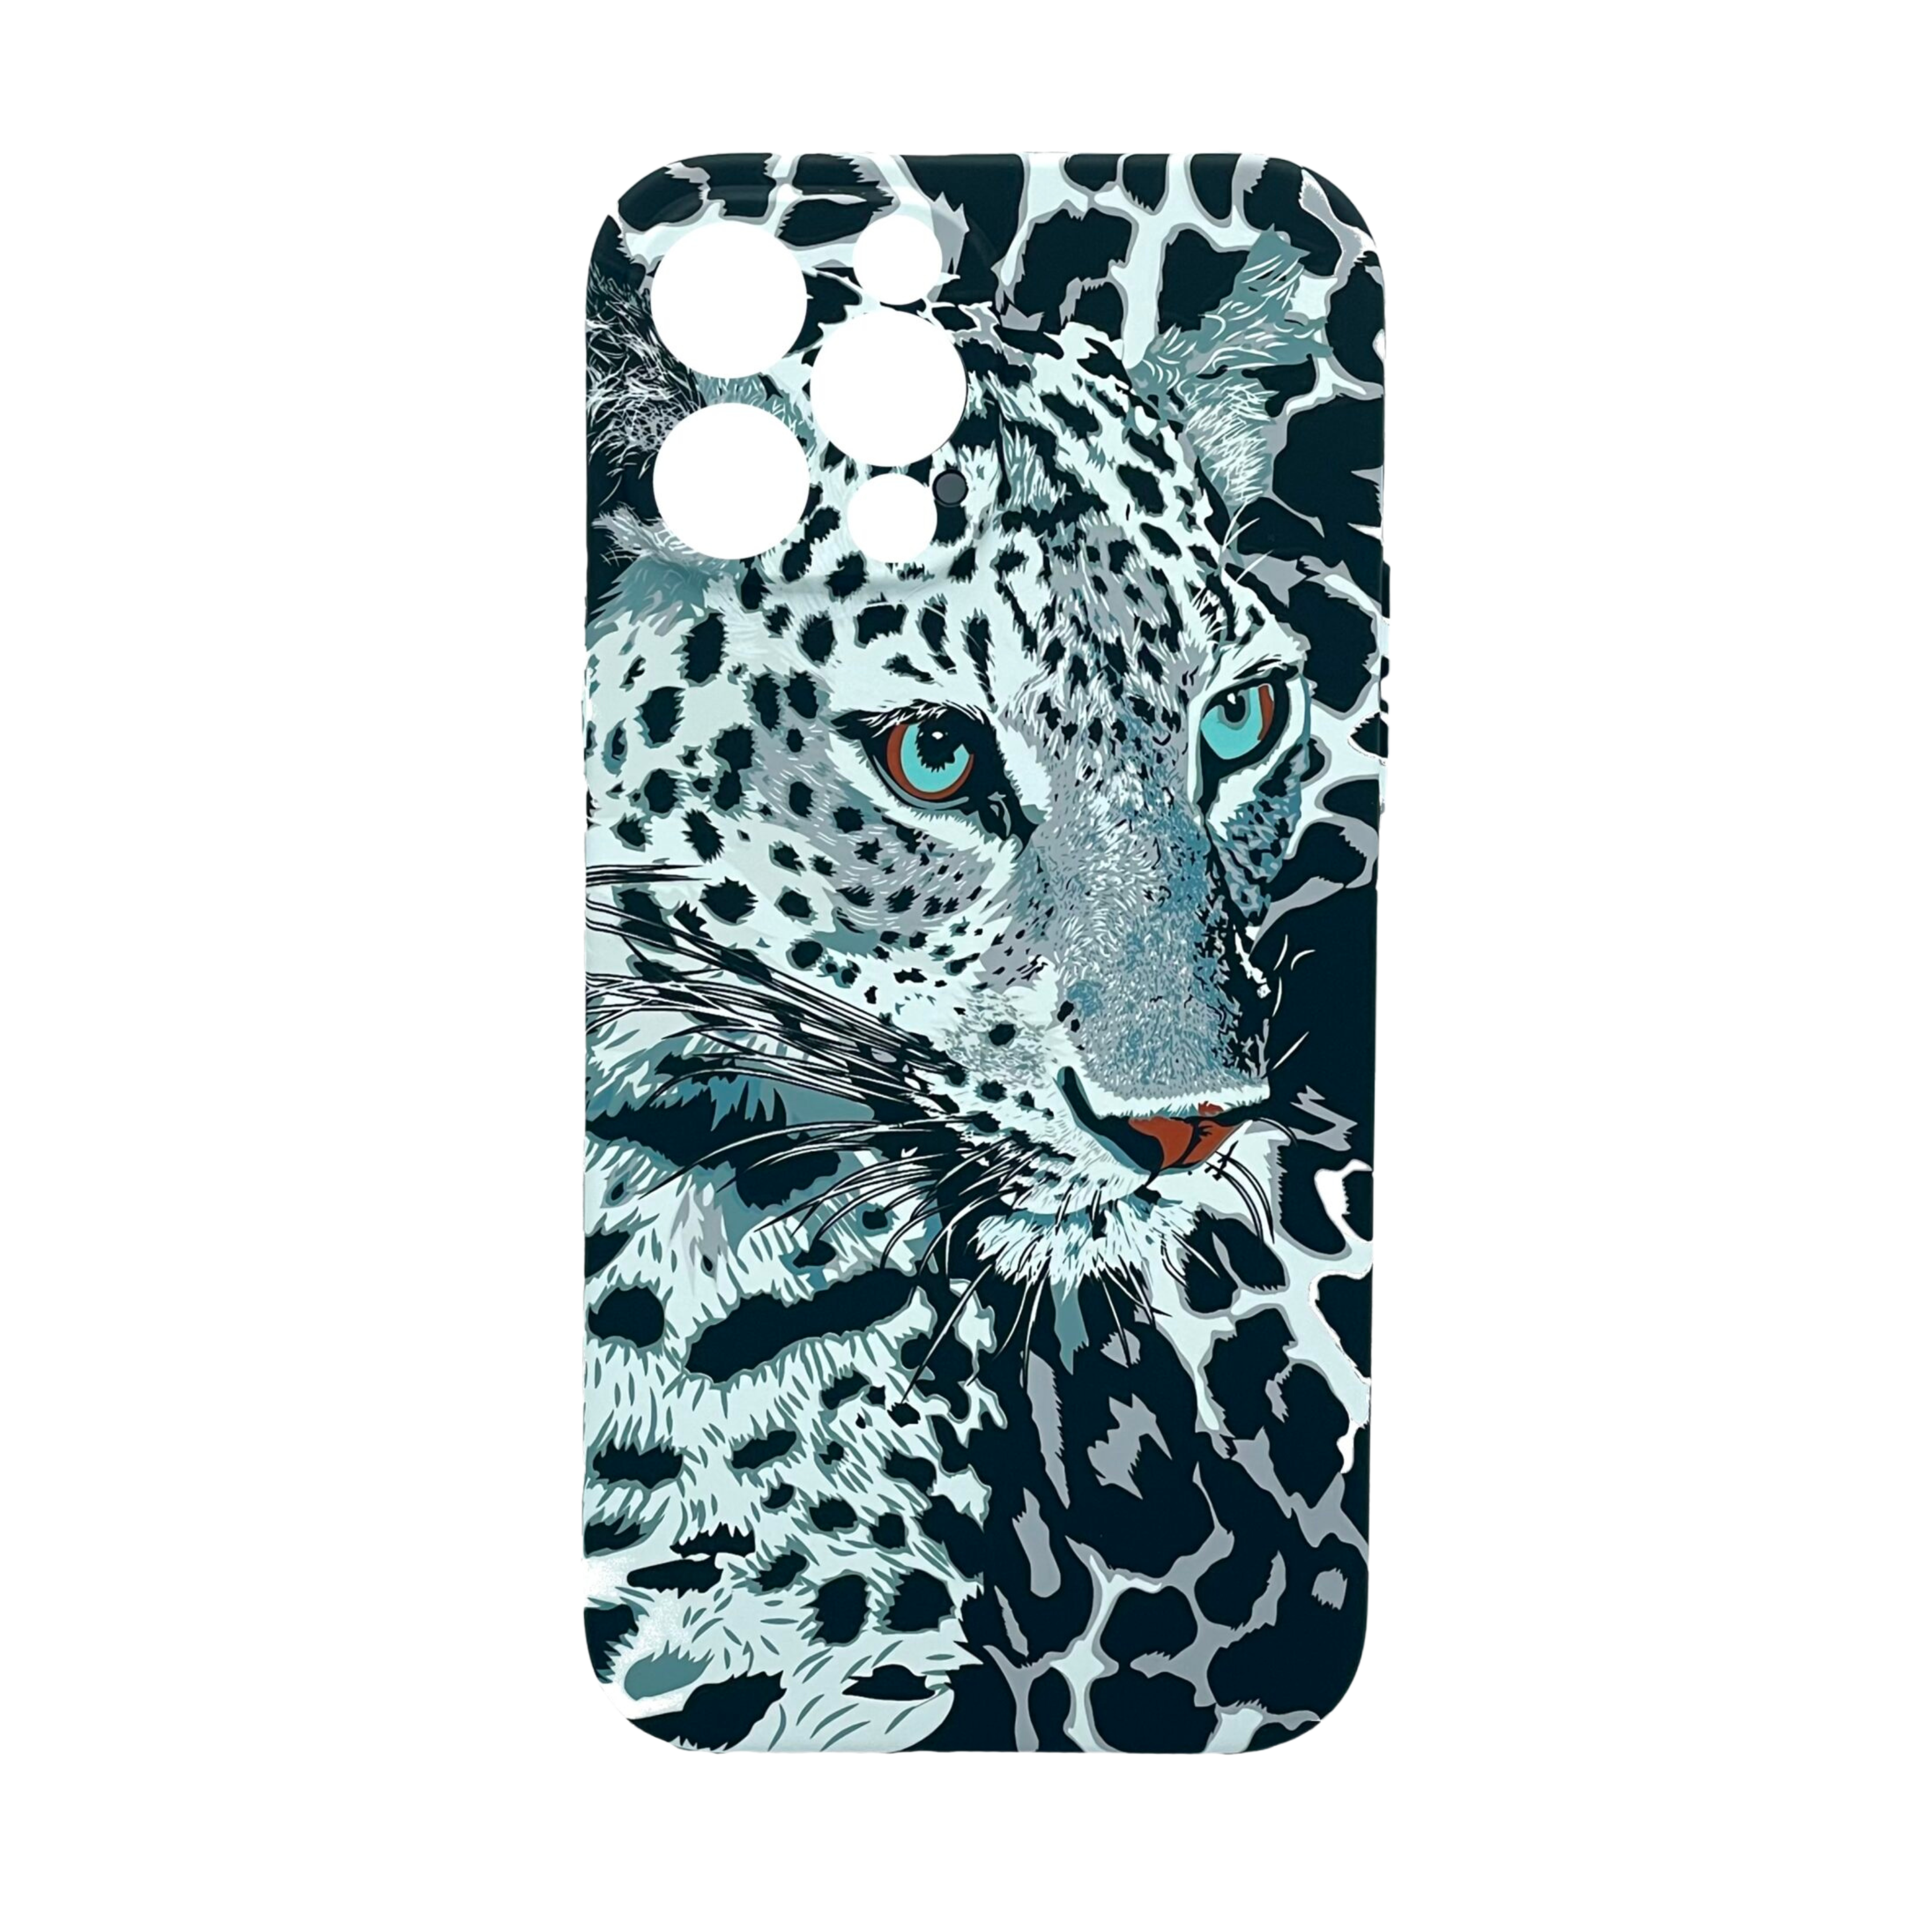 Glow In The Dark Leopard Silicone Cellphone Cover